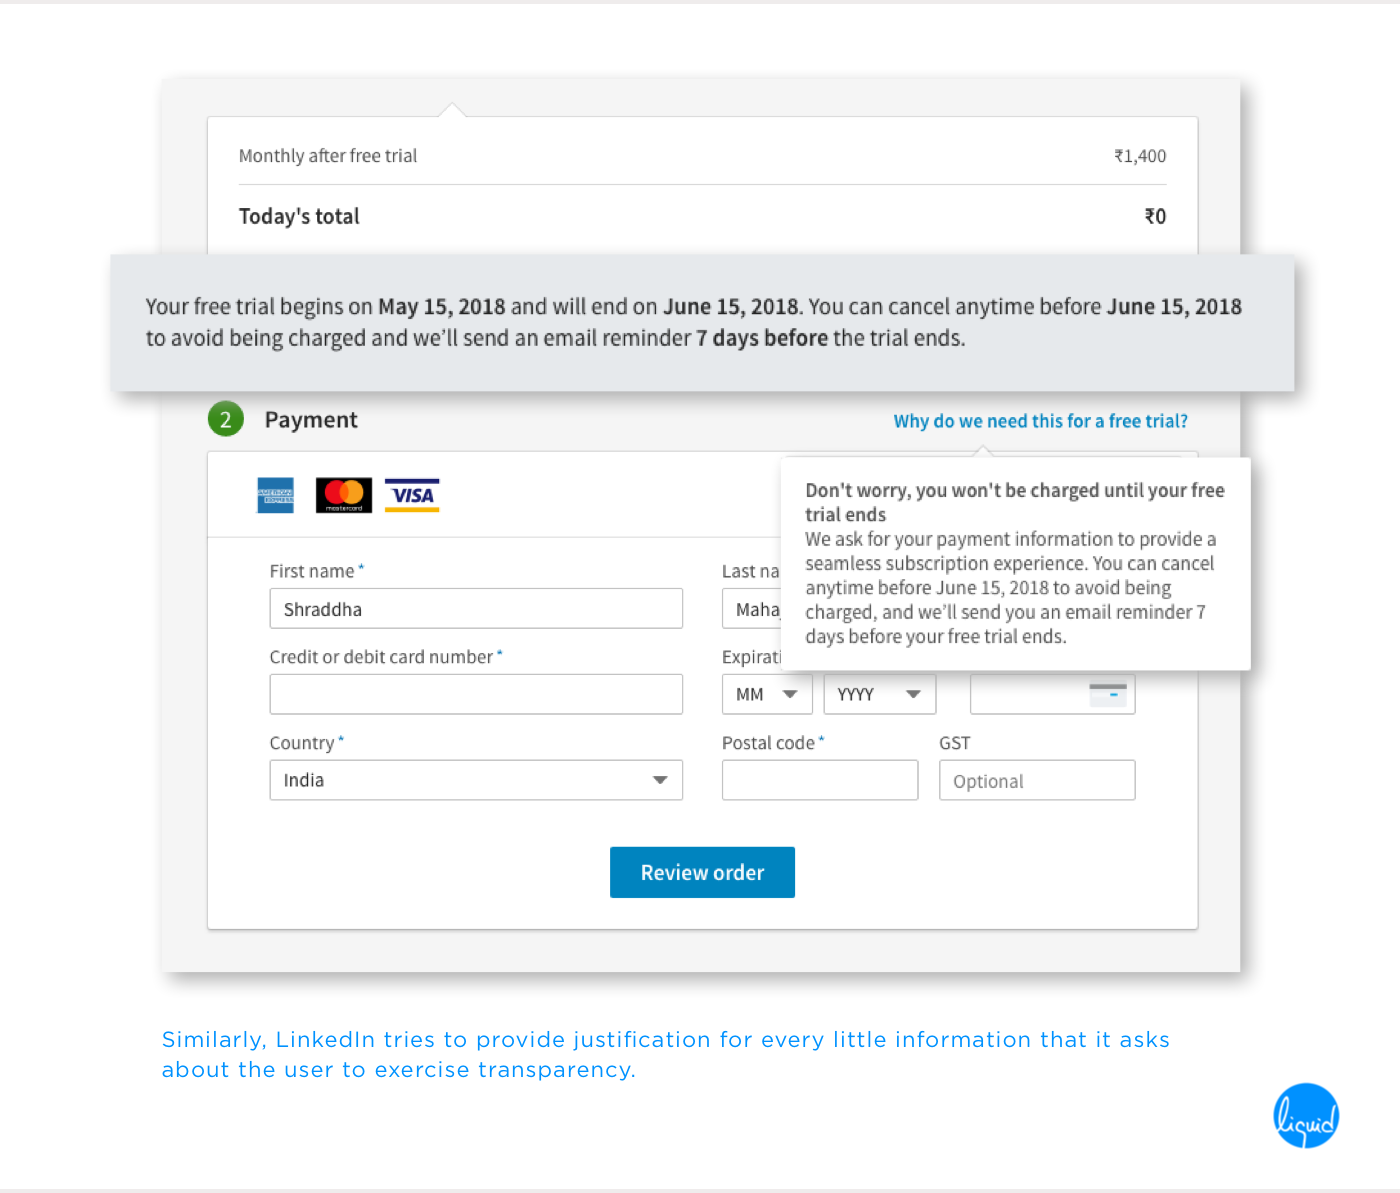 Microcopy on LinkedIn premium subscription payment process and FAQs